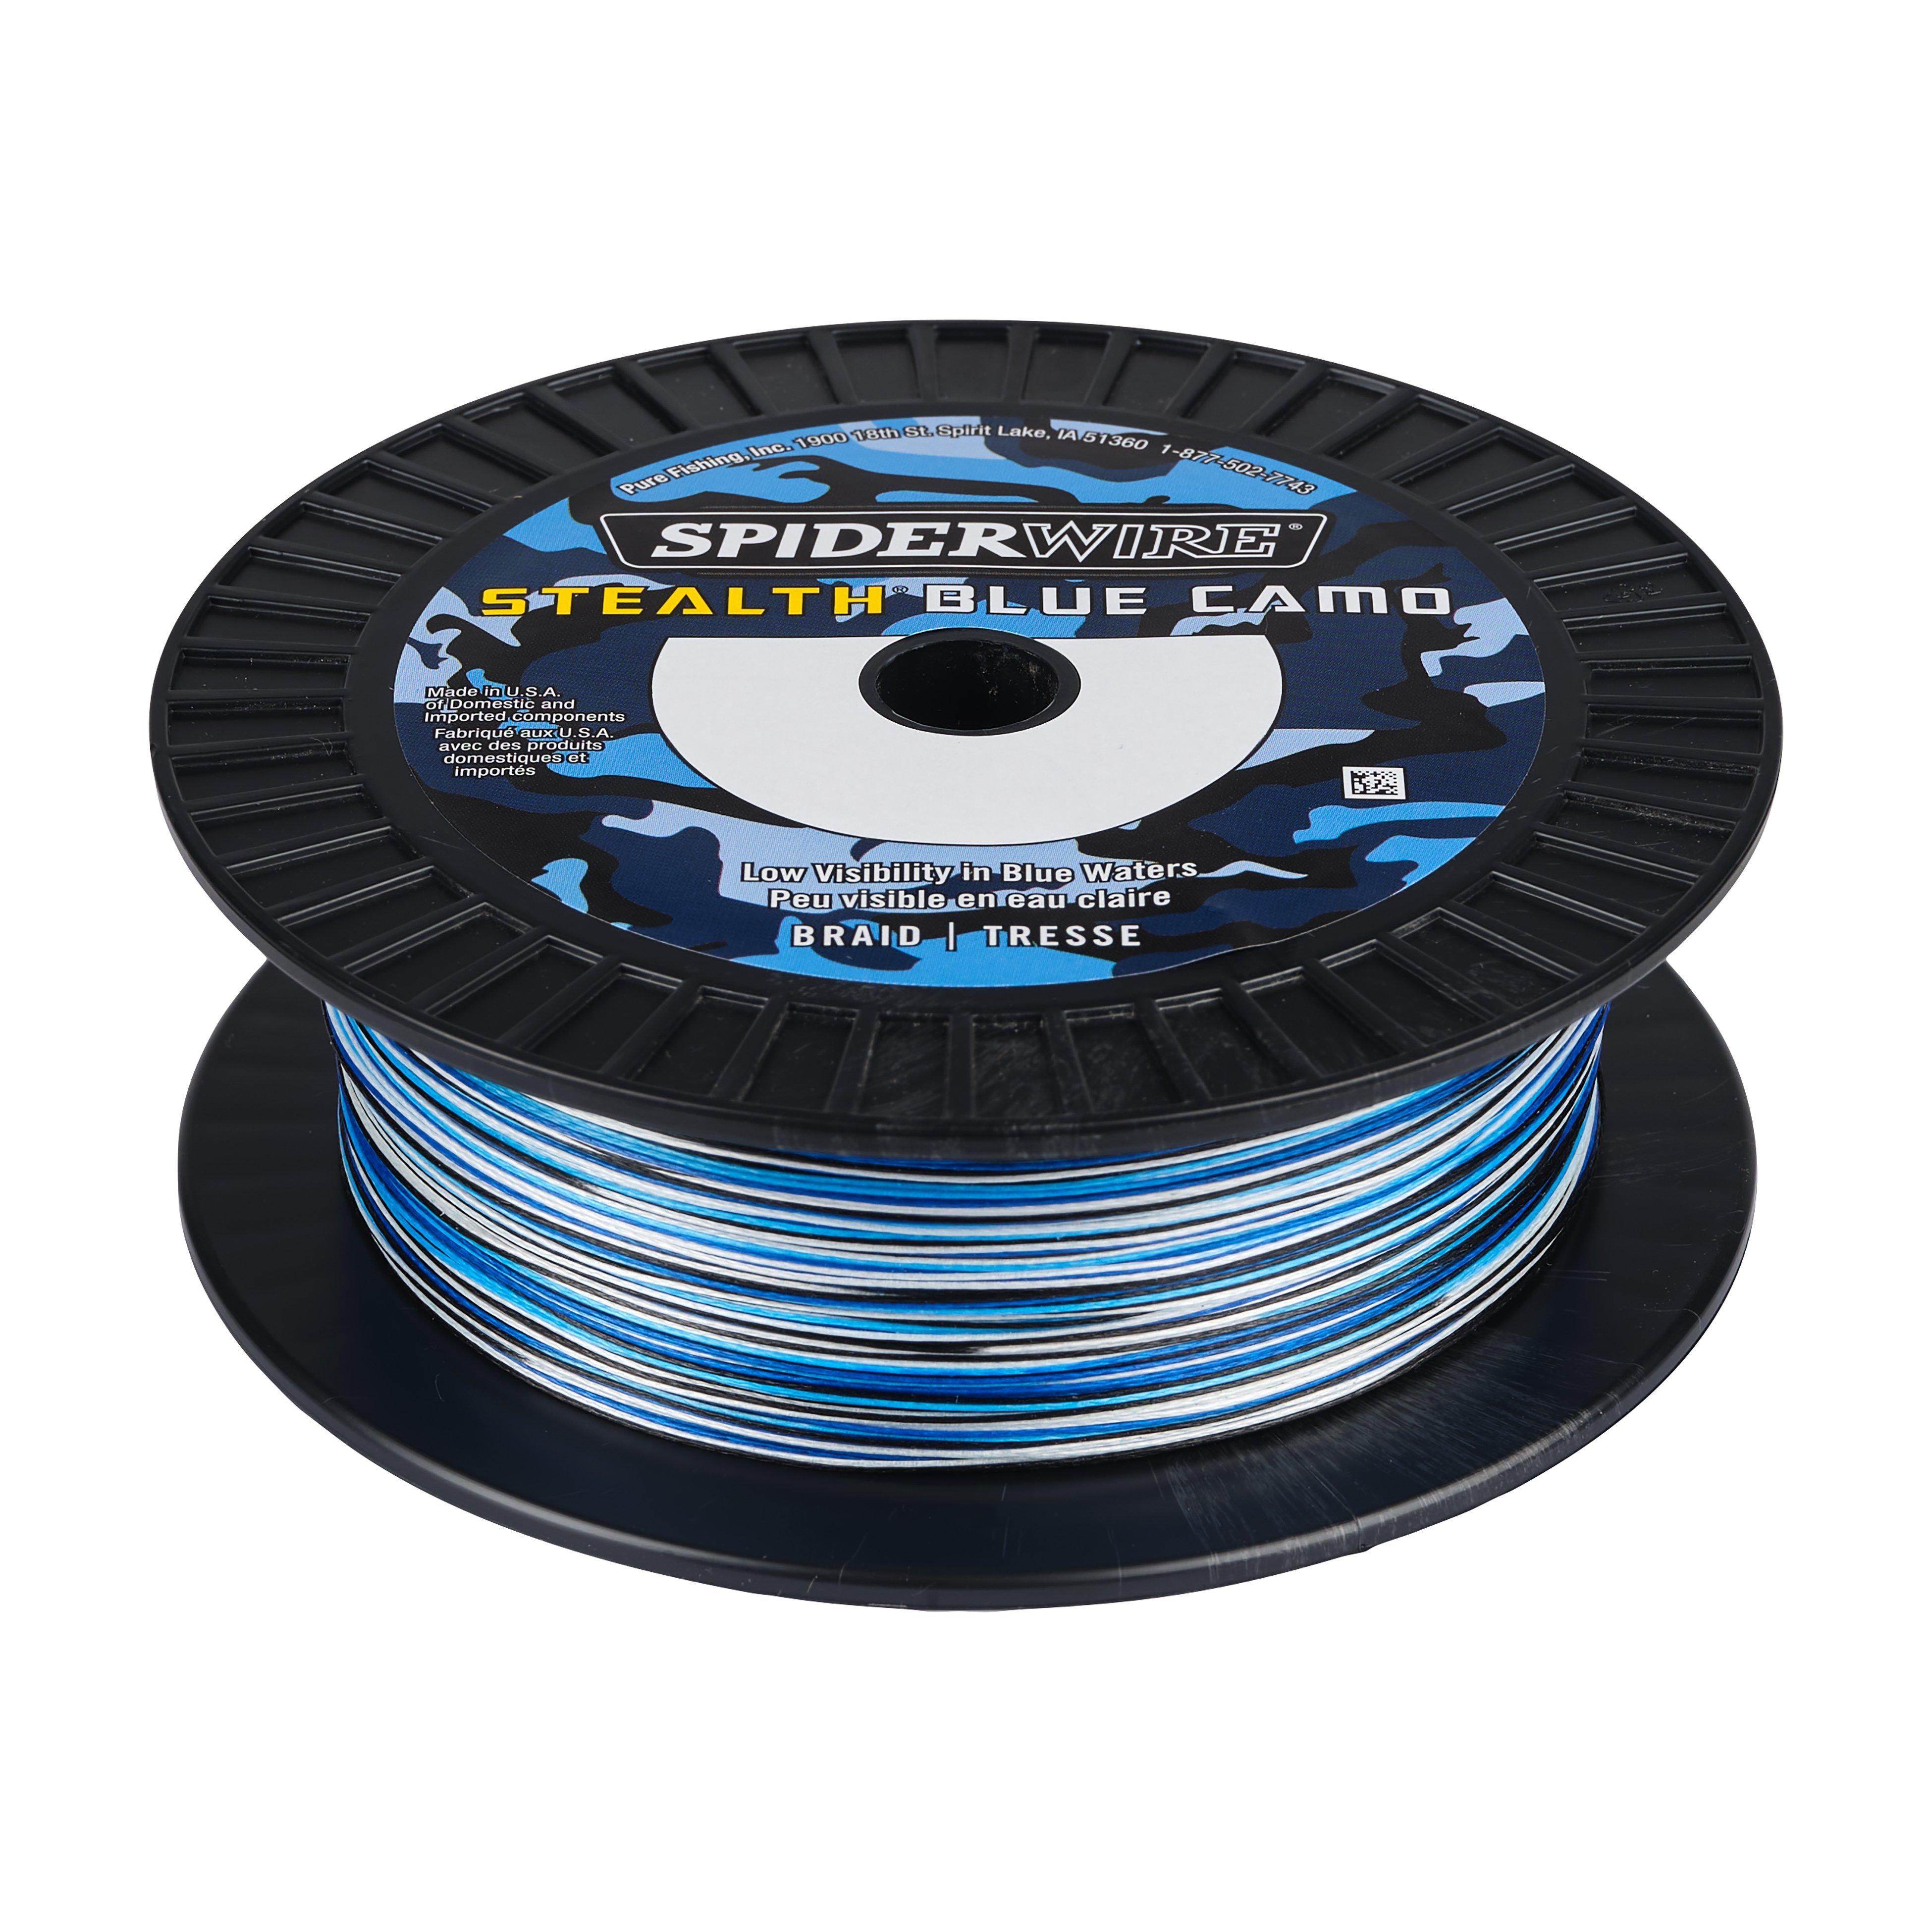 Spiderwire Stealth Blue Camo Superline  Up to 21% Off Free Shipping over  $49!